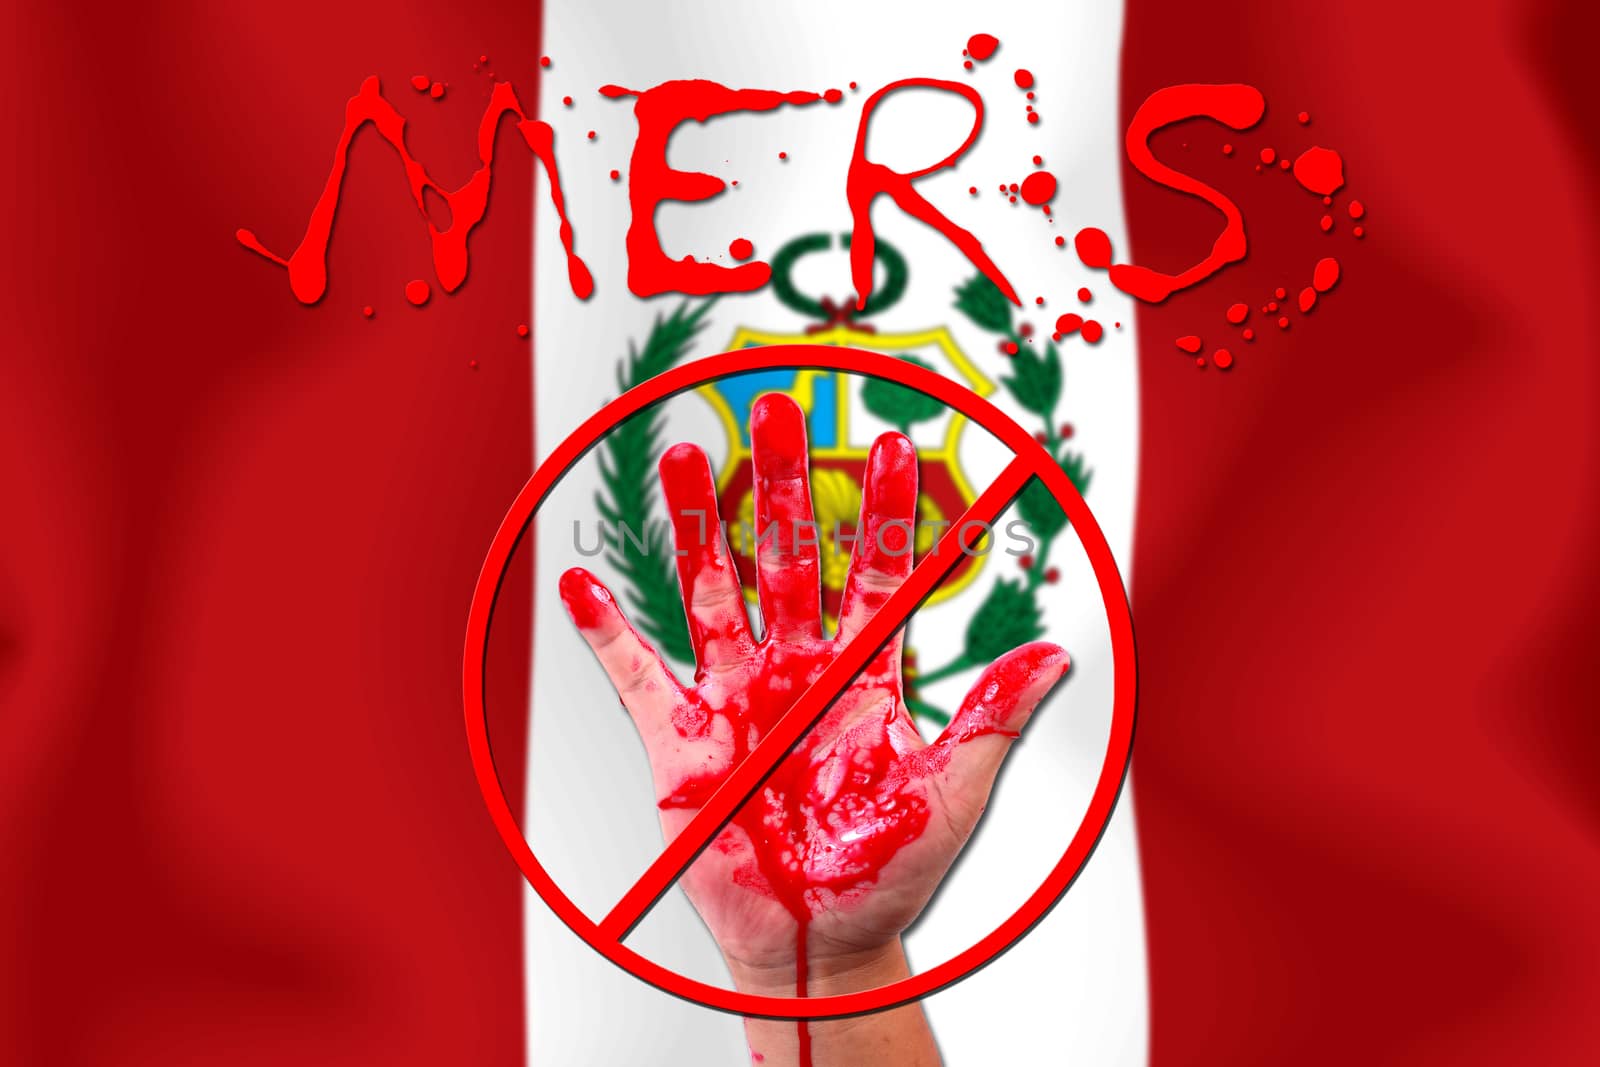 Concept show hand stop MERS Virus epidemic  Peru flag background.